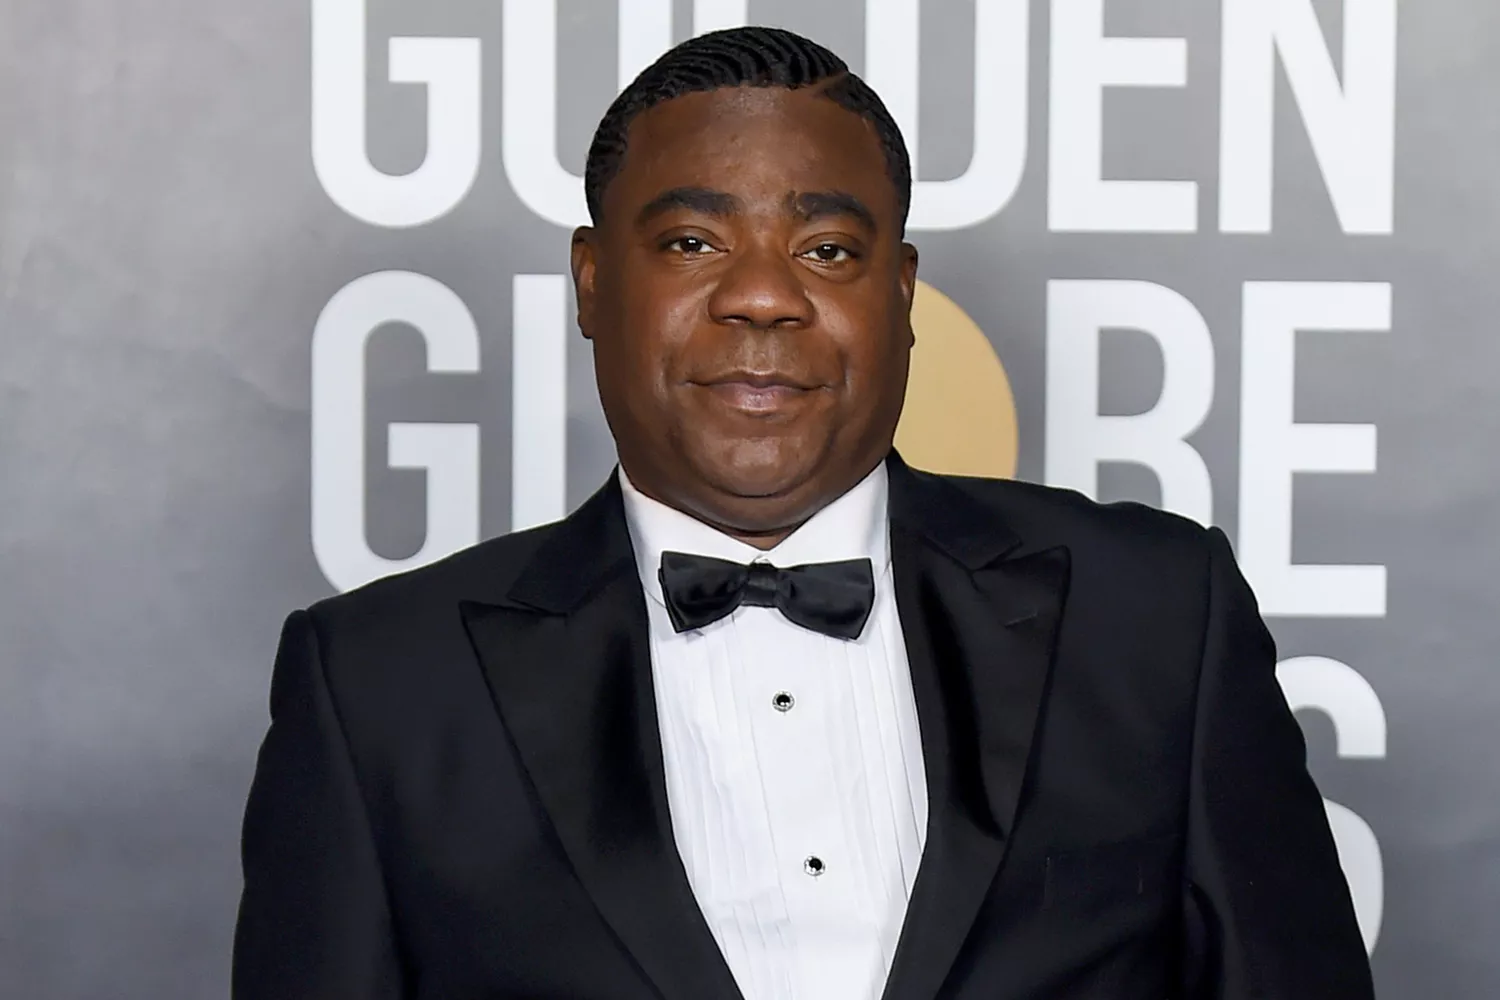 Tracy Morgan attends the 78th Annual Golden Globe Awards at The Rainbow Room on February 28, 2021 in New York City.